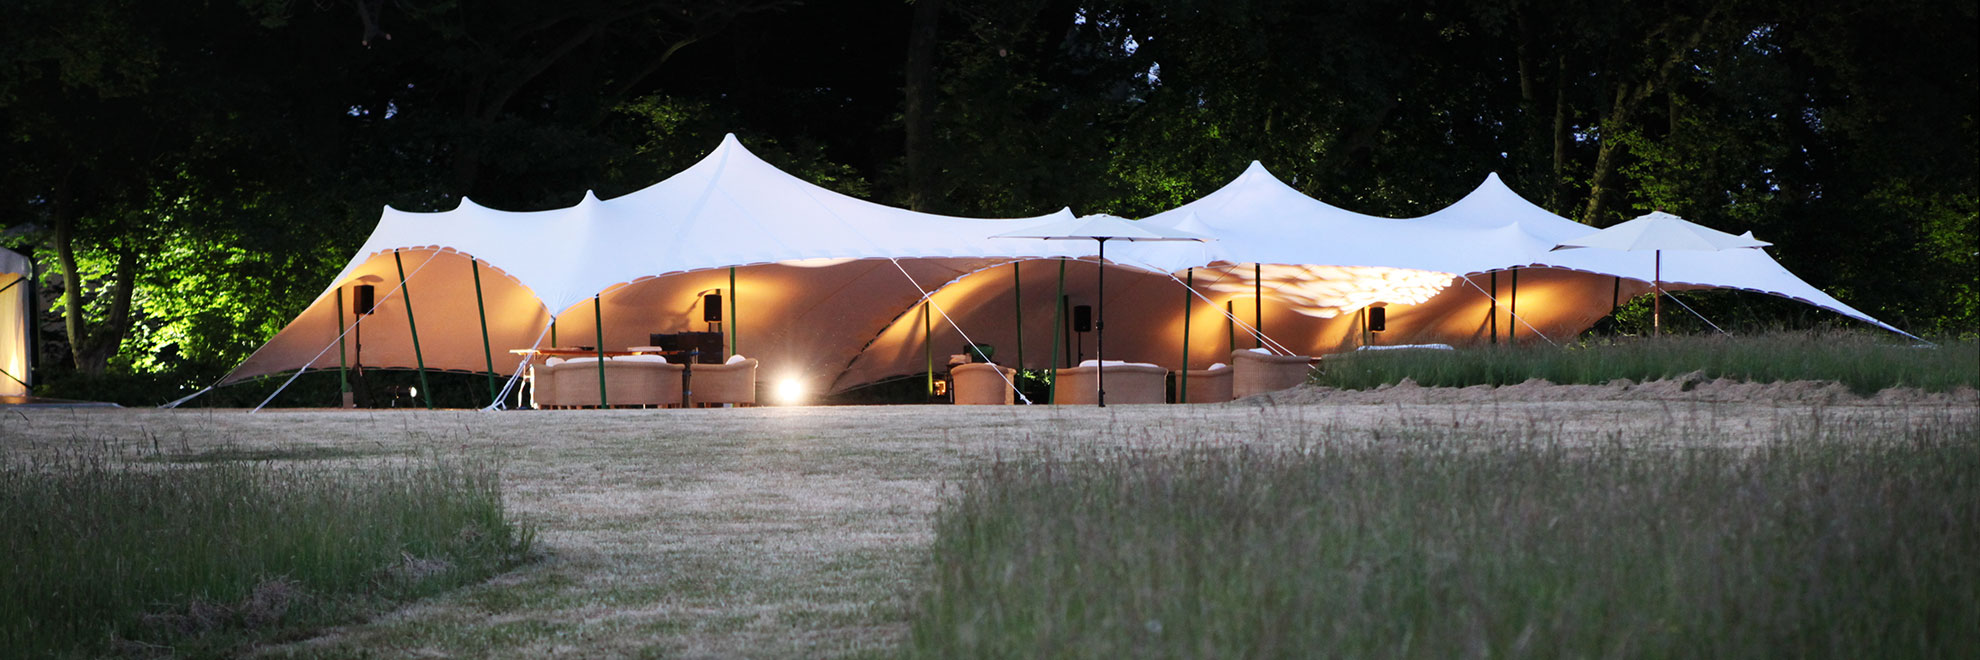 Beige stretch tent in a meadow field lit up at dusk.